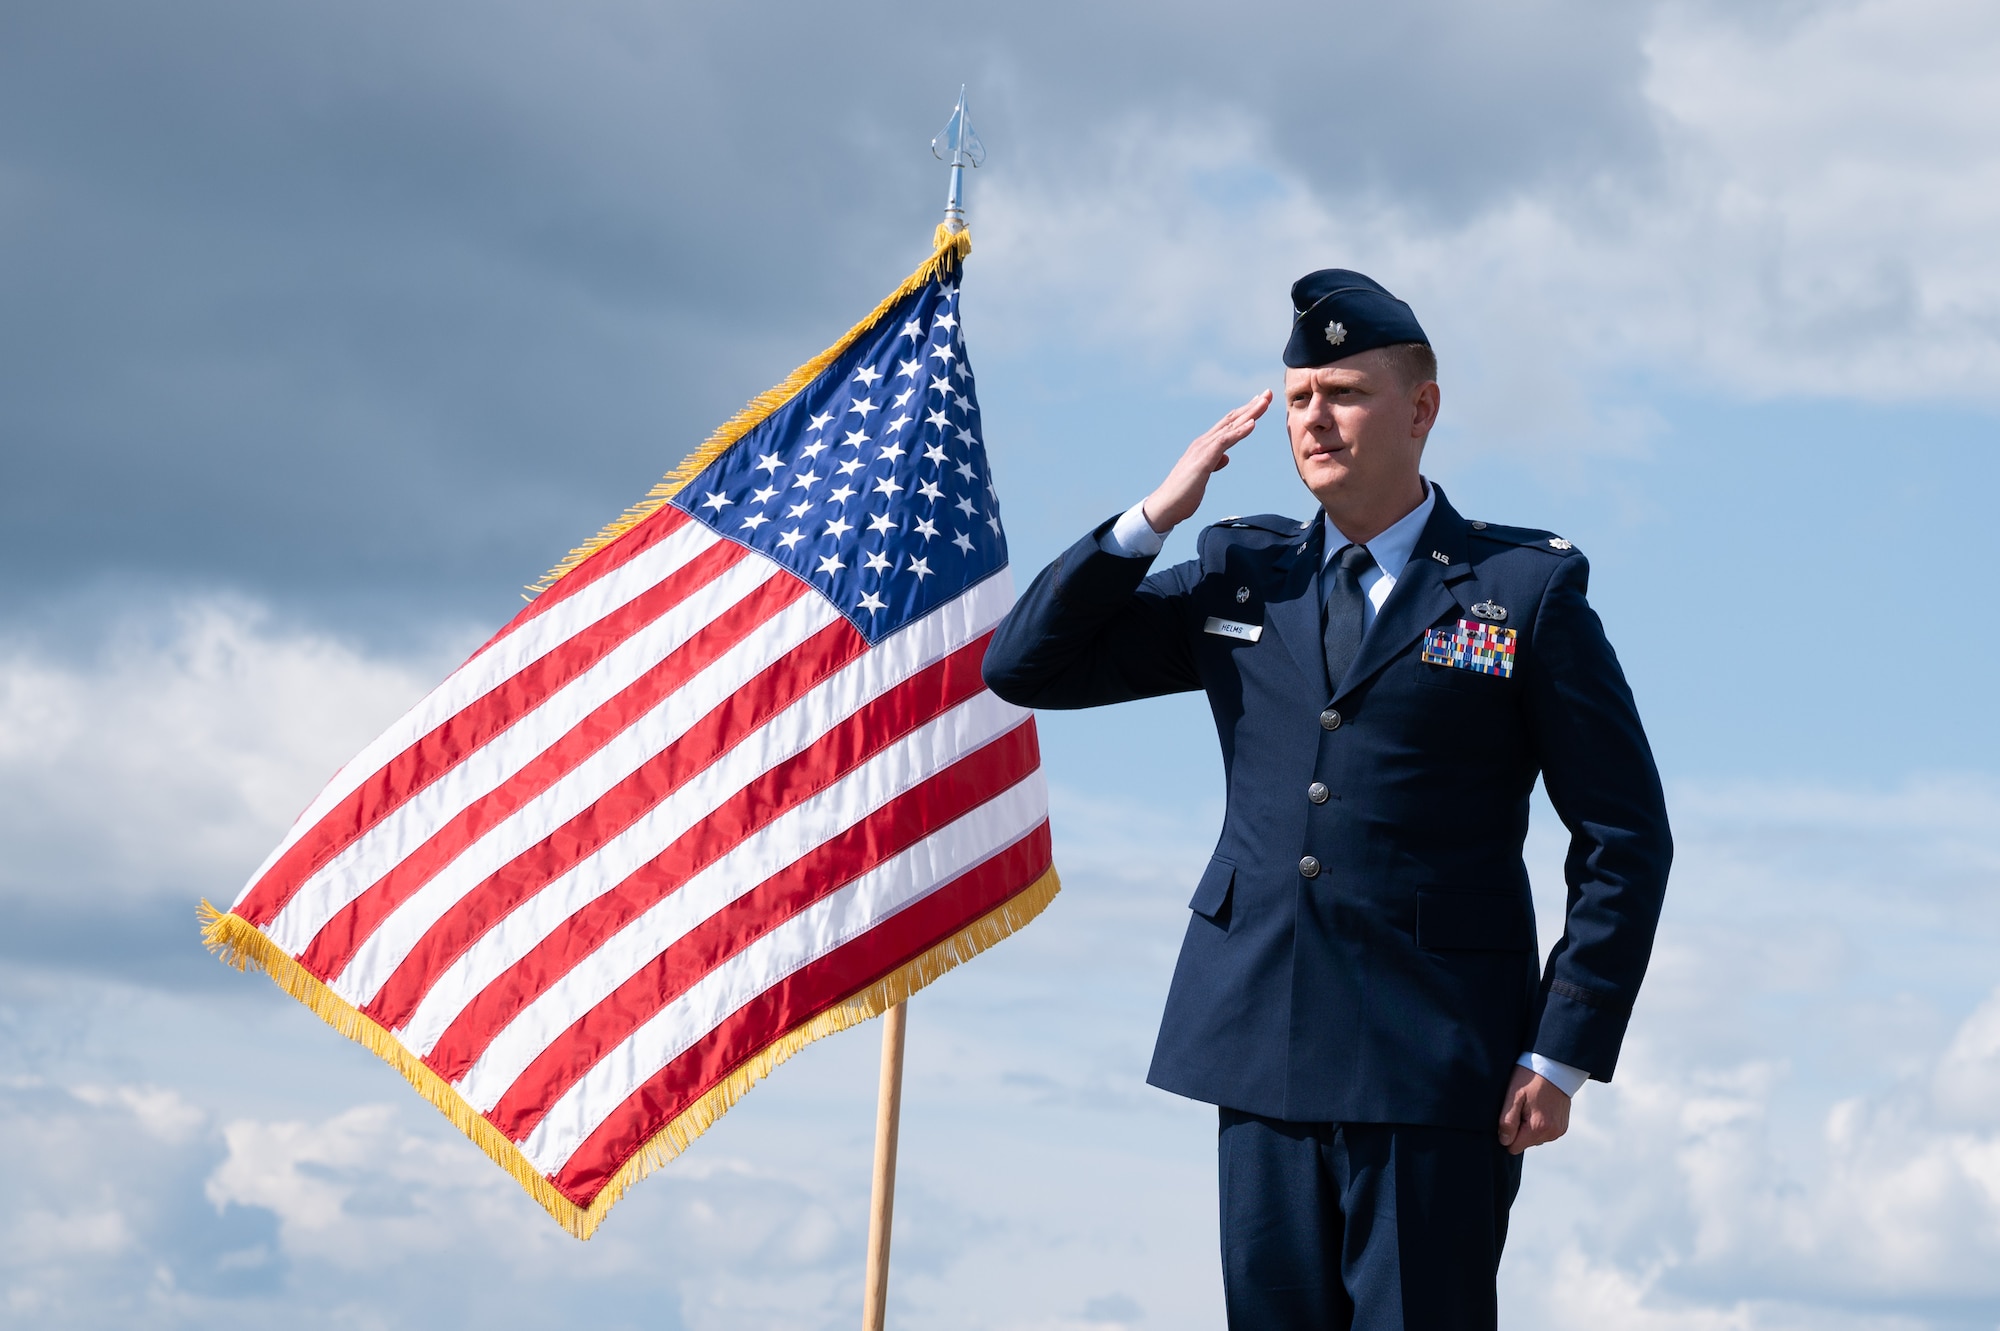 U.S. Air Force Lt. Col. Cory Helms, the 354th Munitions Squadron commander, renders the first squadron salute during an assumption of command ceremony on Eielson Air Force Base, Alaska, July 26, 2021.